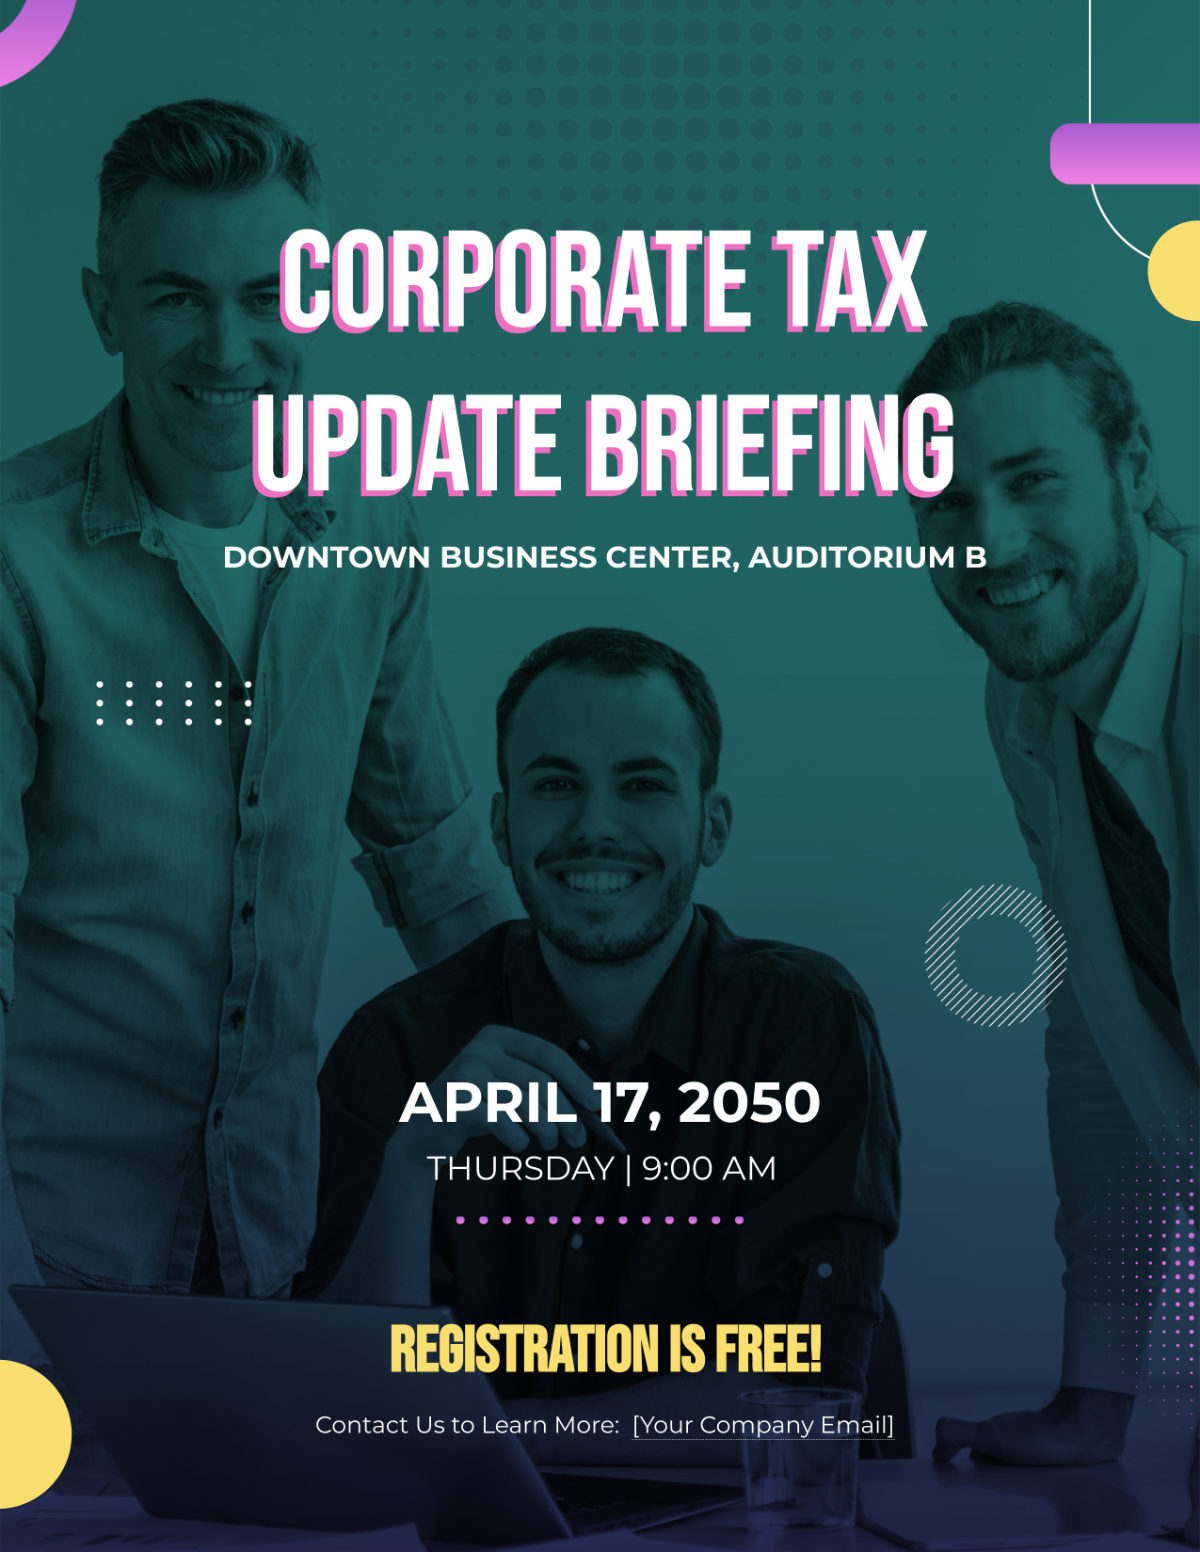 Corporate Tax Update Briefing Flyer Template